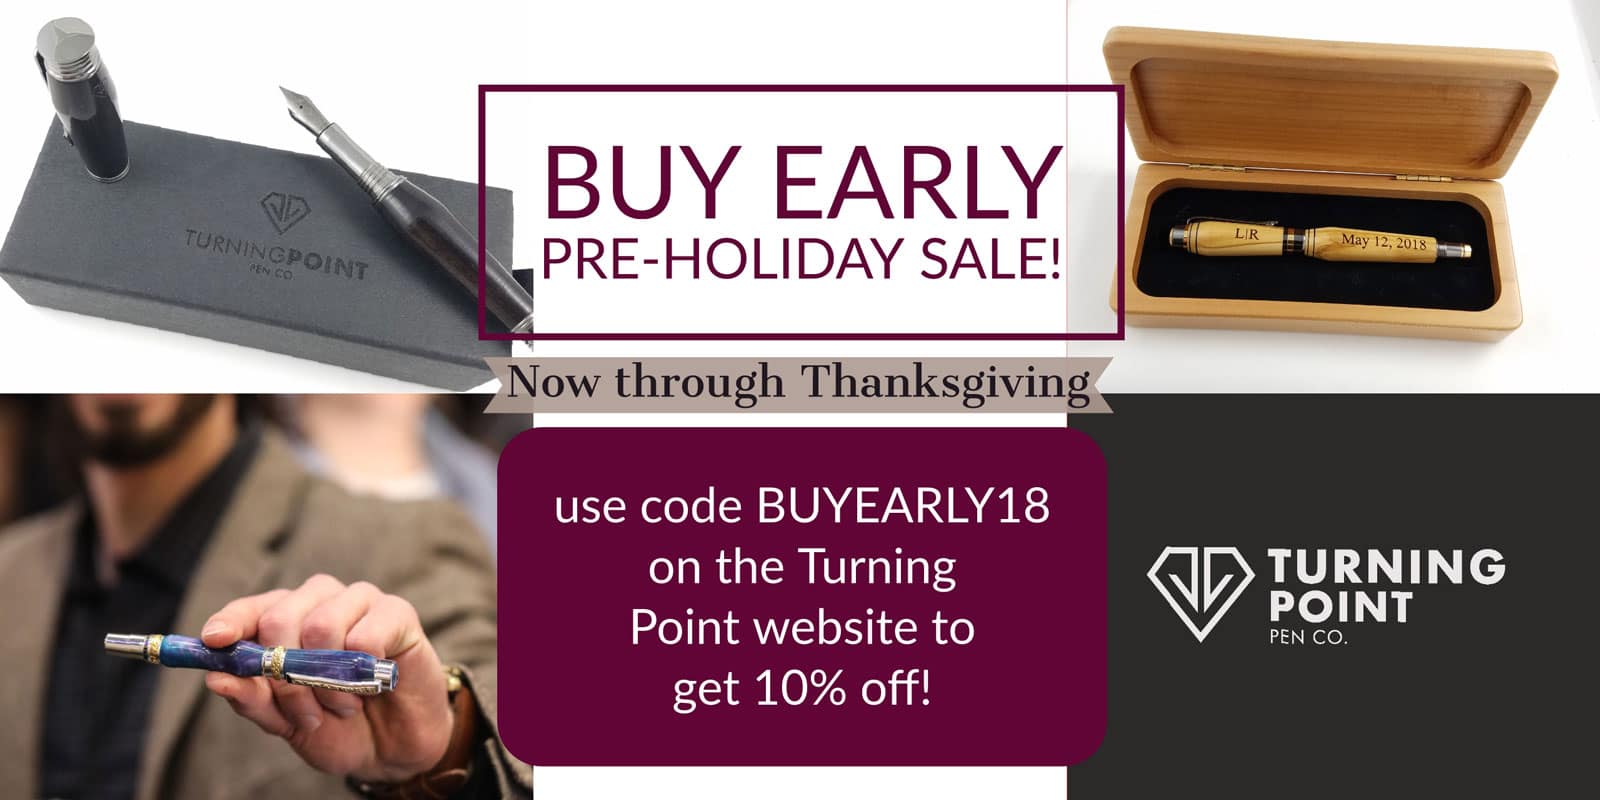 Buy Early Pre Holiday Sale 2018 Turning Point Pen Co.